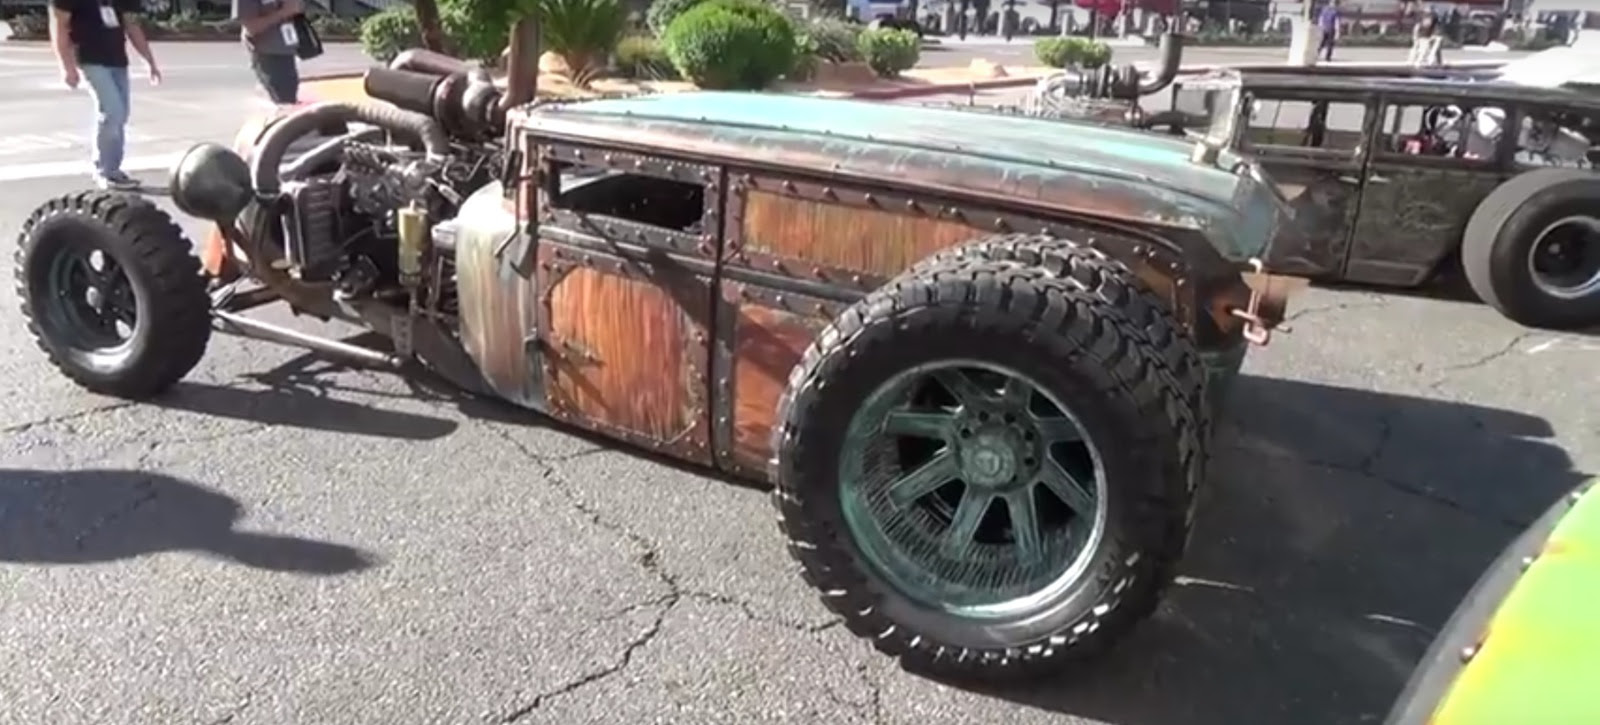 Are Rat Rods The Dadaists Of The New Century